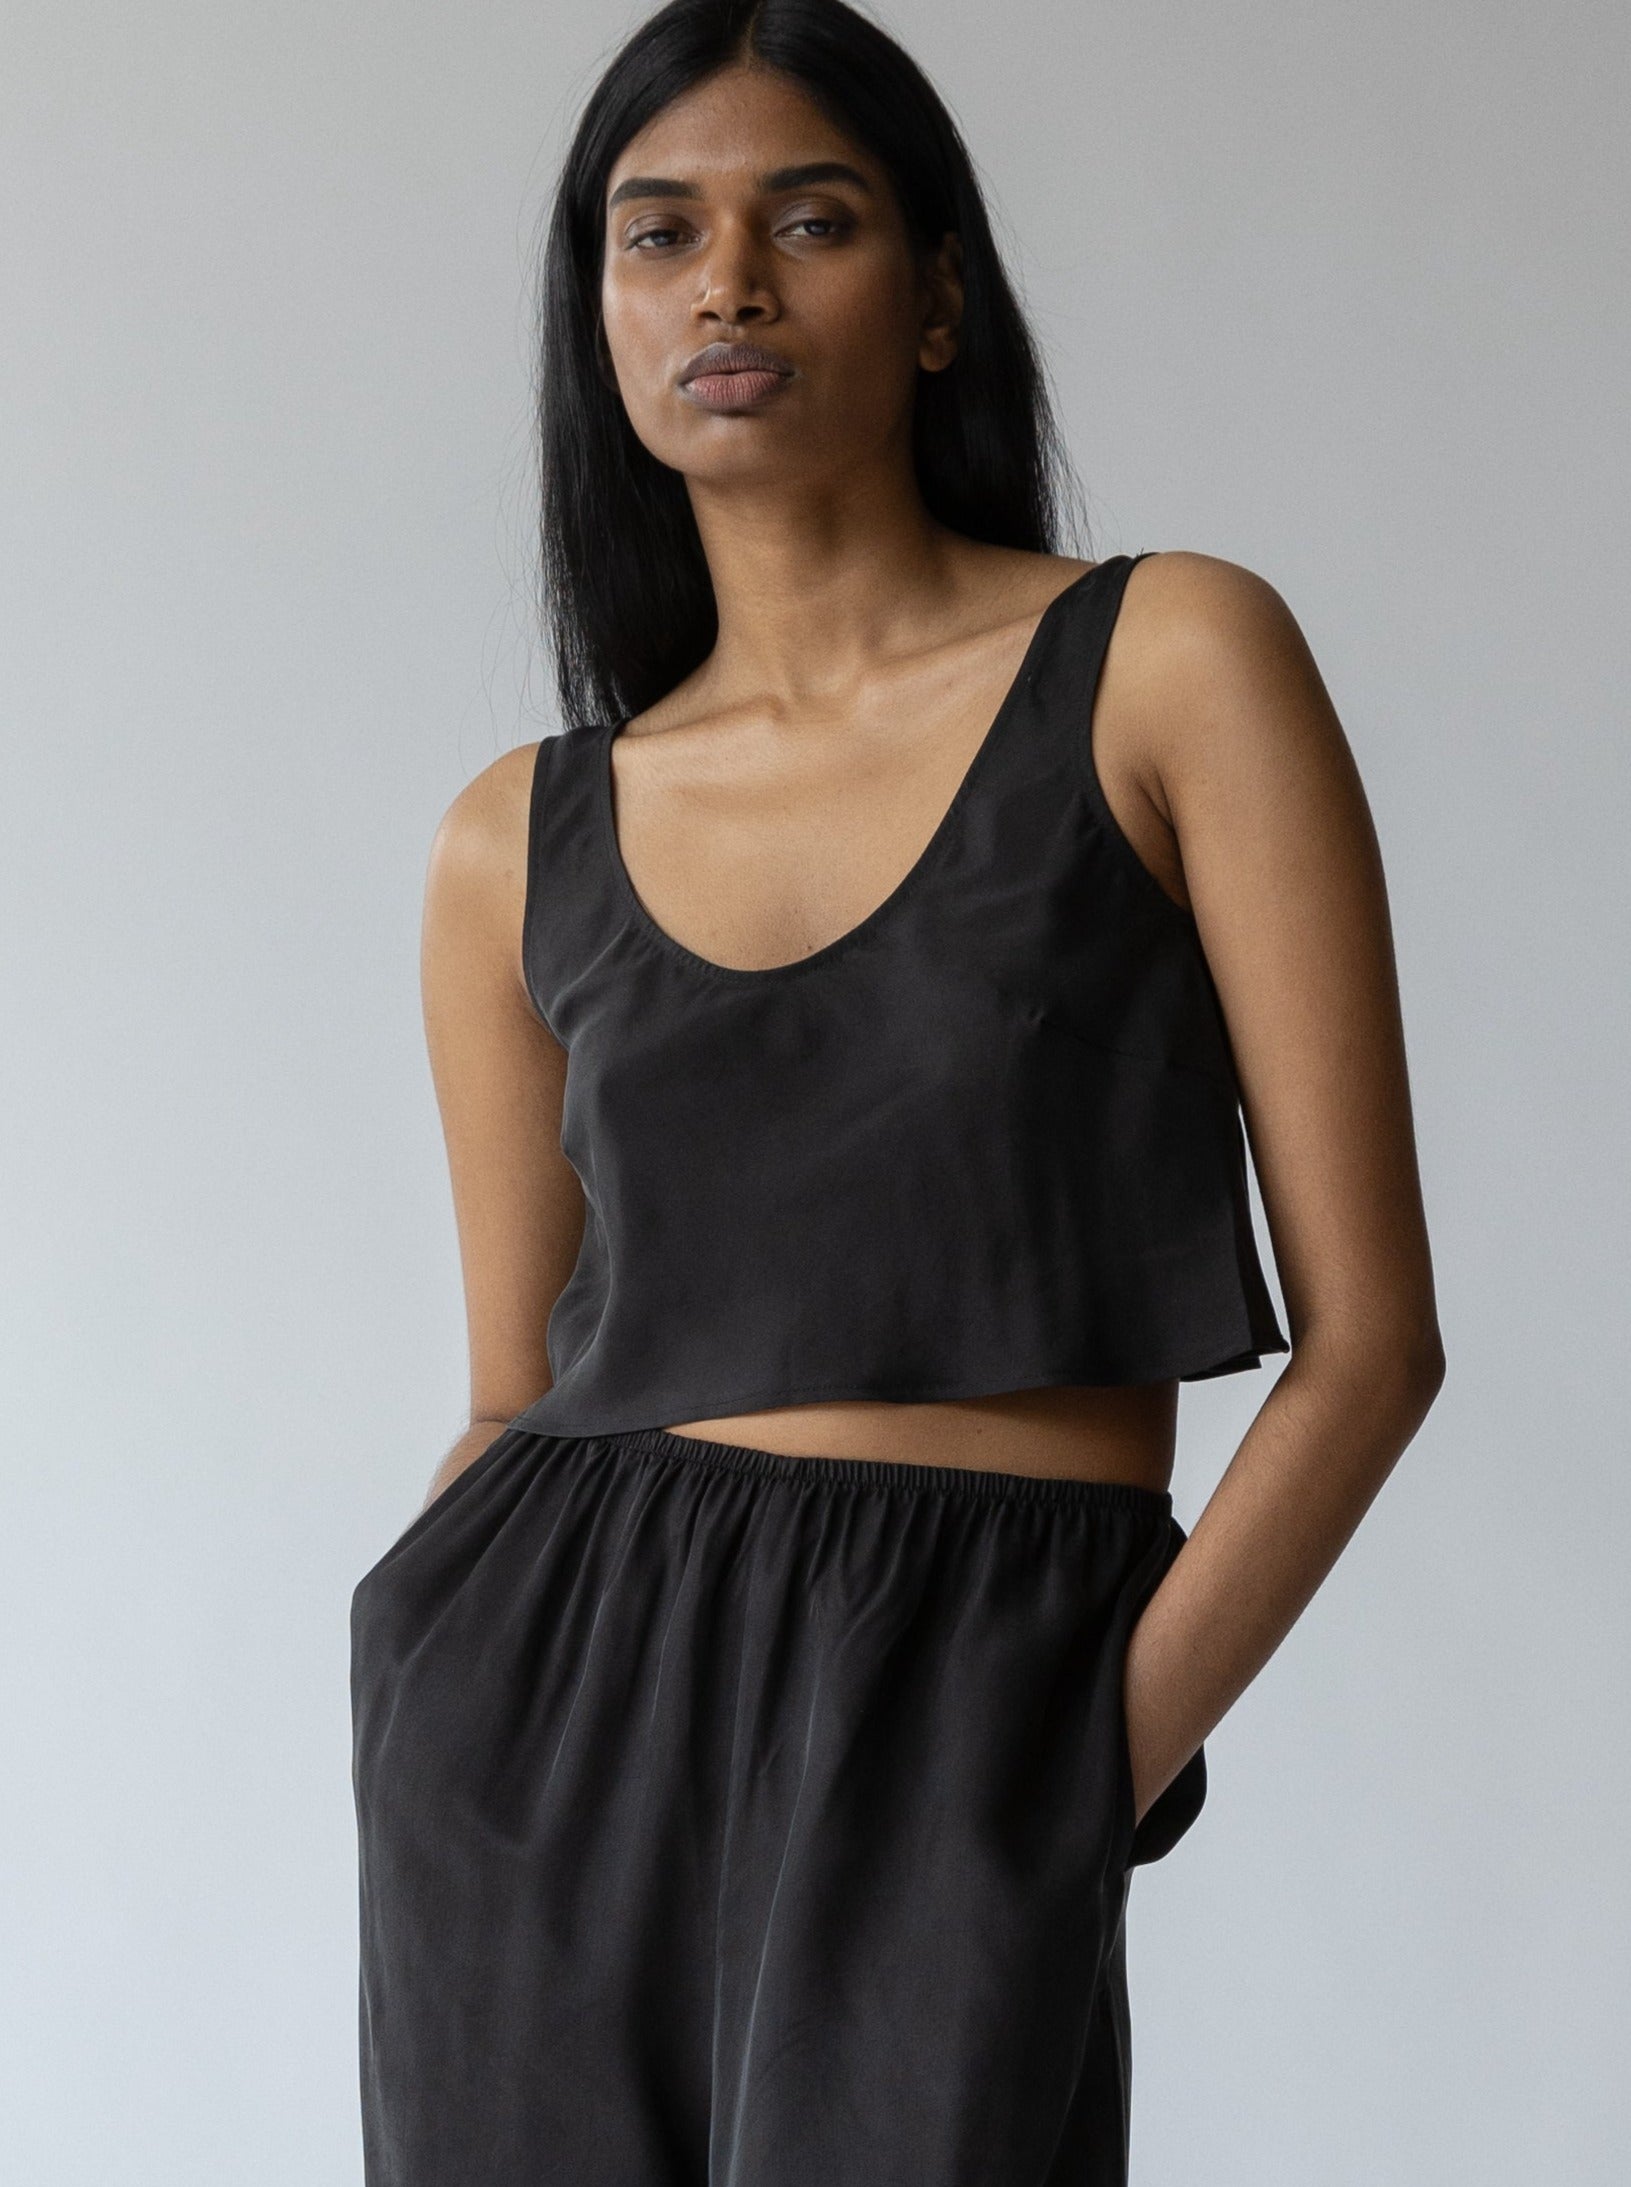 Thumbnail image of Murano Camisole in Soft Black